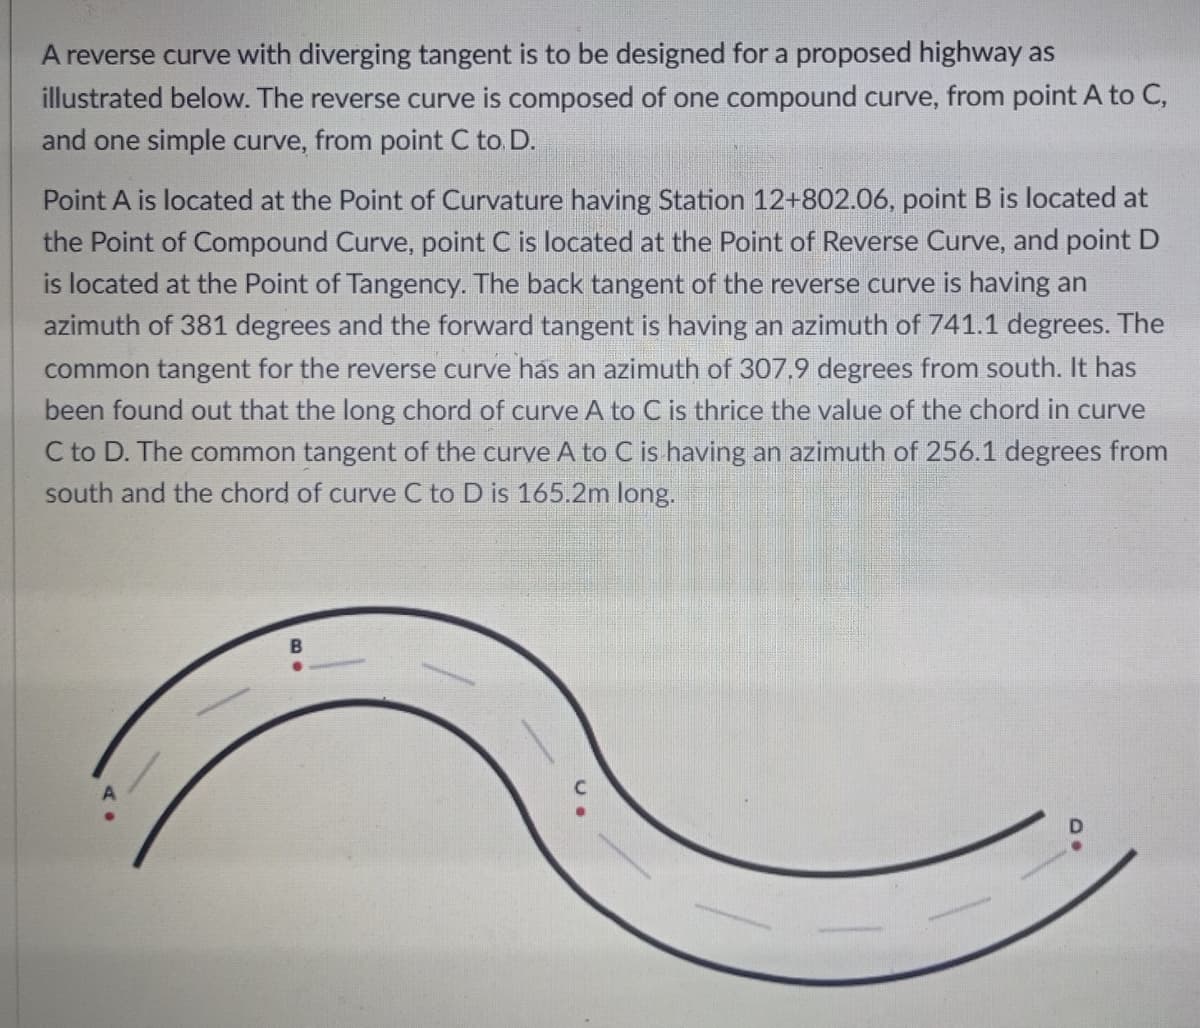 A reverse curve with diverging tangent is to be designed for a proposed highway as
illustrated below. The reverse curve is composed of one compound curve, from point A to C,
and one simple curve, from point C to D.
Point A is located at the Point of Curvature having Station 12+802.06, point B is located at
the Point of Compound Curve, point C is located at the Point of Reverse Curve, and point D
is located at the Point of Tangency. The back tangent of the reverse curve is having an
azimuth of 381 degrees and the forward tangent is having an azimuth of 741.1 degrees. The
common tangent for the reverse curve has an azimuth of 307.9 degrees from south. It has
been found out that the long chord of curve A to C is thrice the value of the chord in curve
C to D. The common tangent of the curve A to C is having an azimuth of 256.1 degrees from
south and the chord of curve C to D is 165.2m long.
